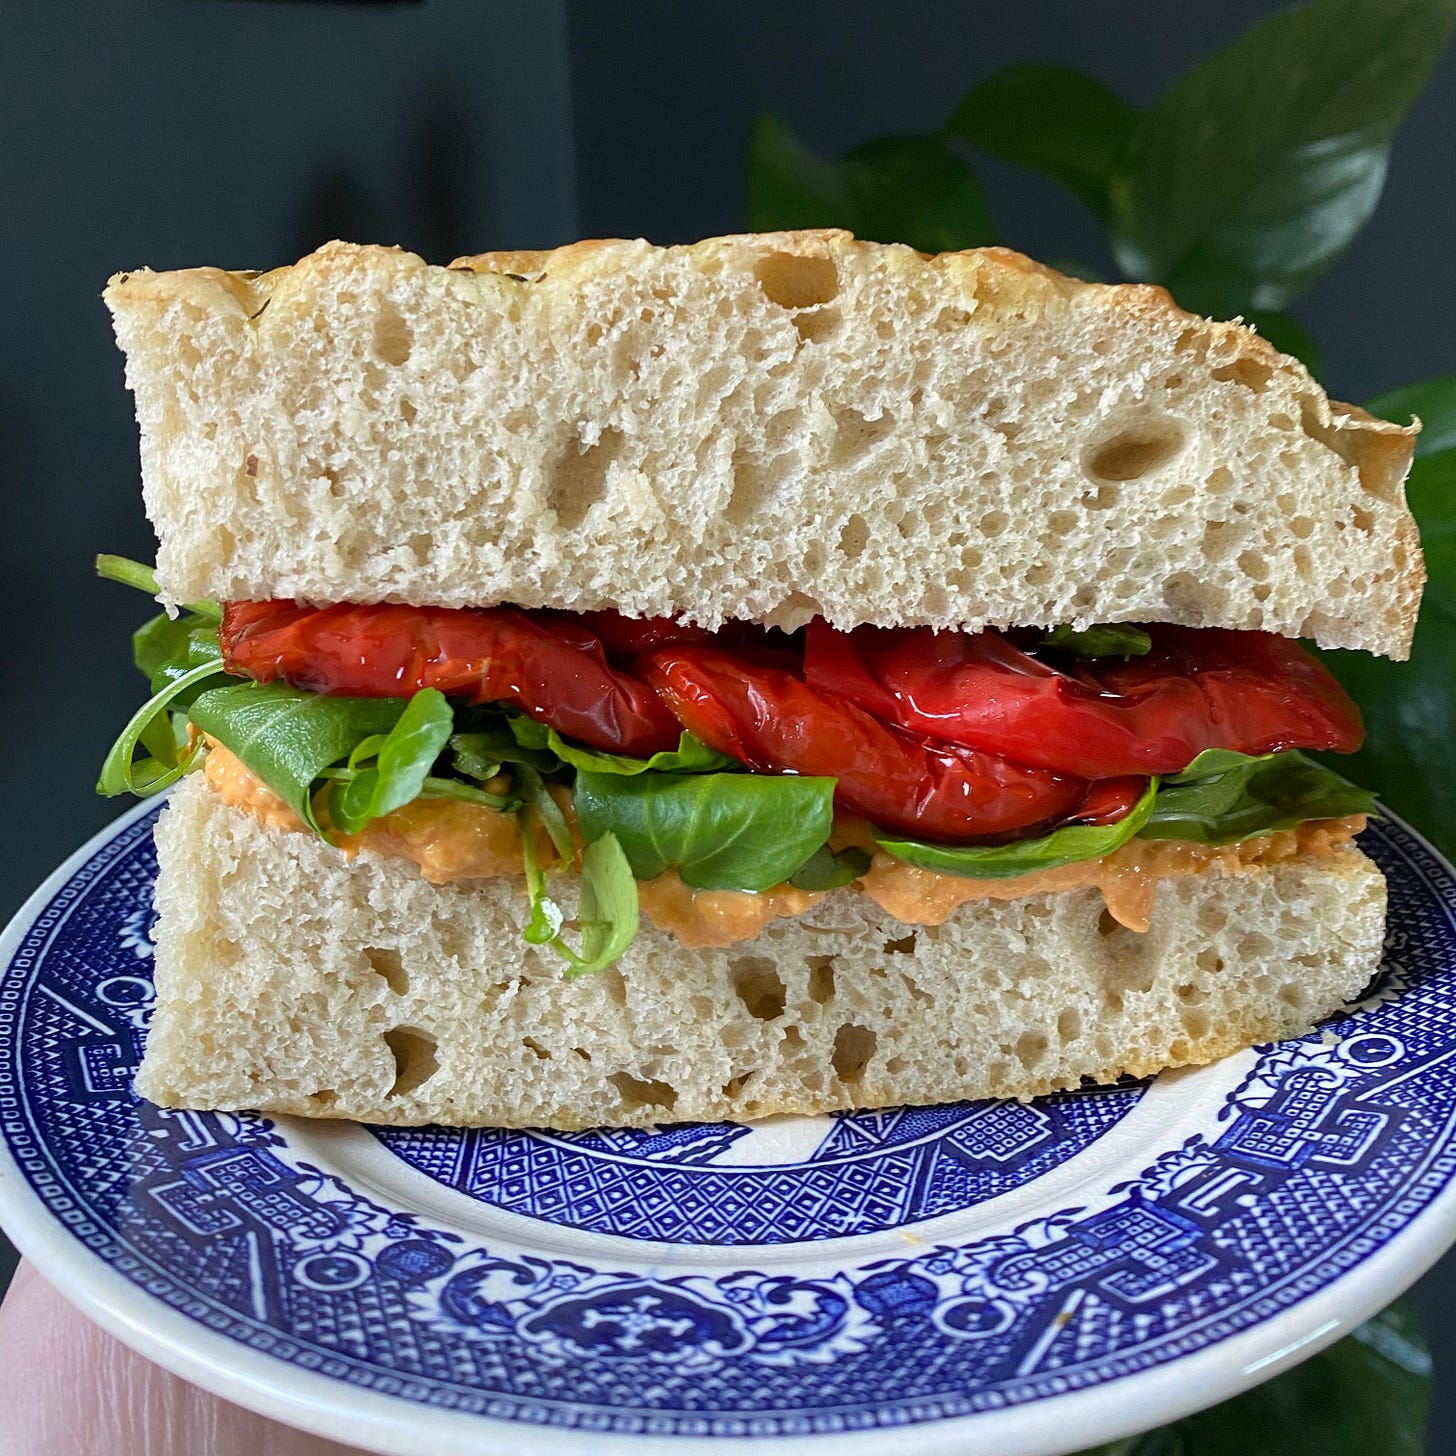 Focaccia sandwich filled with red peppers, salad and houmous